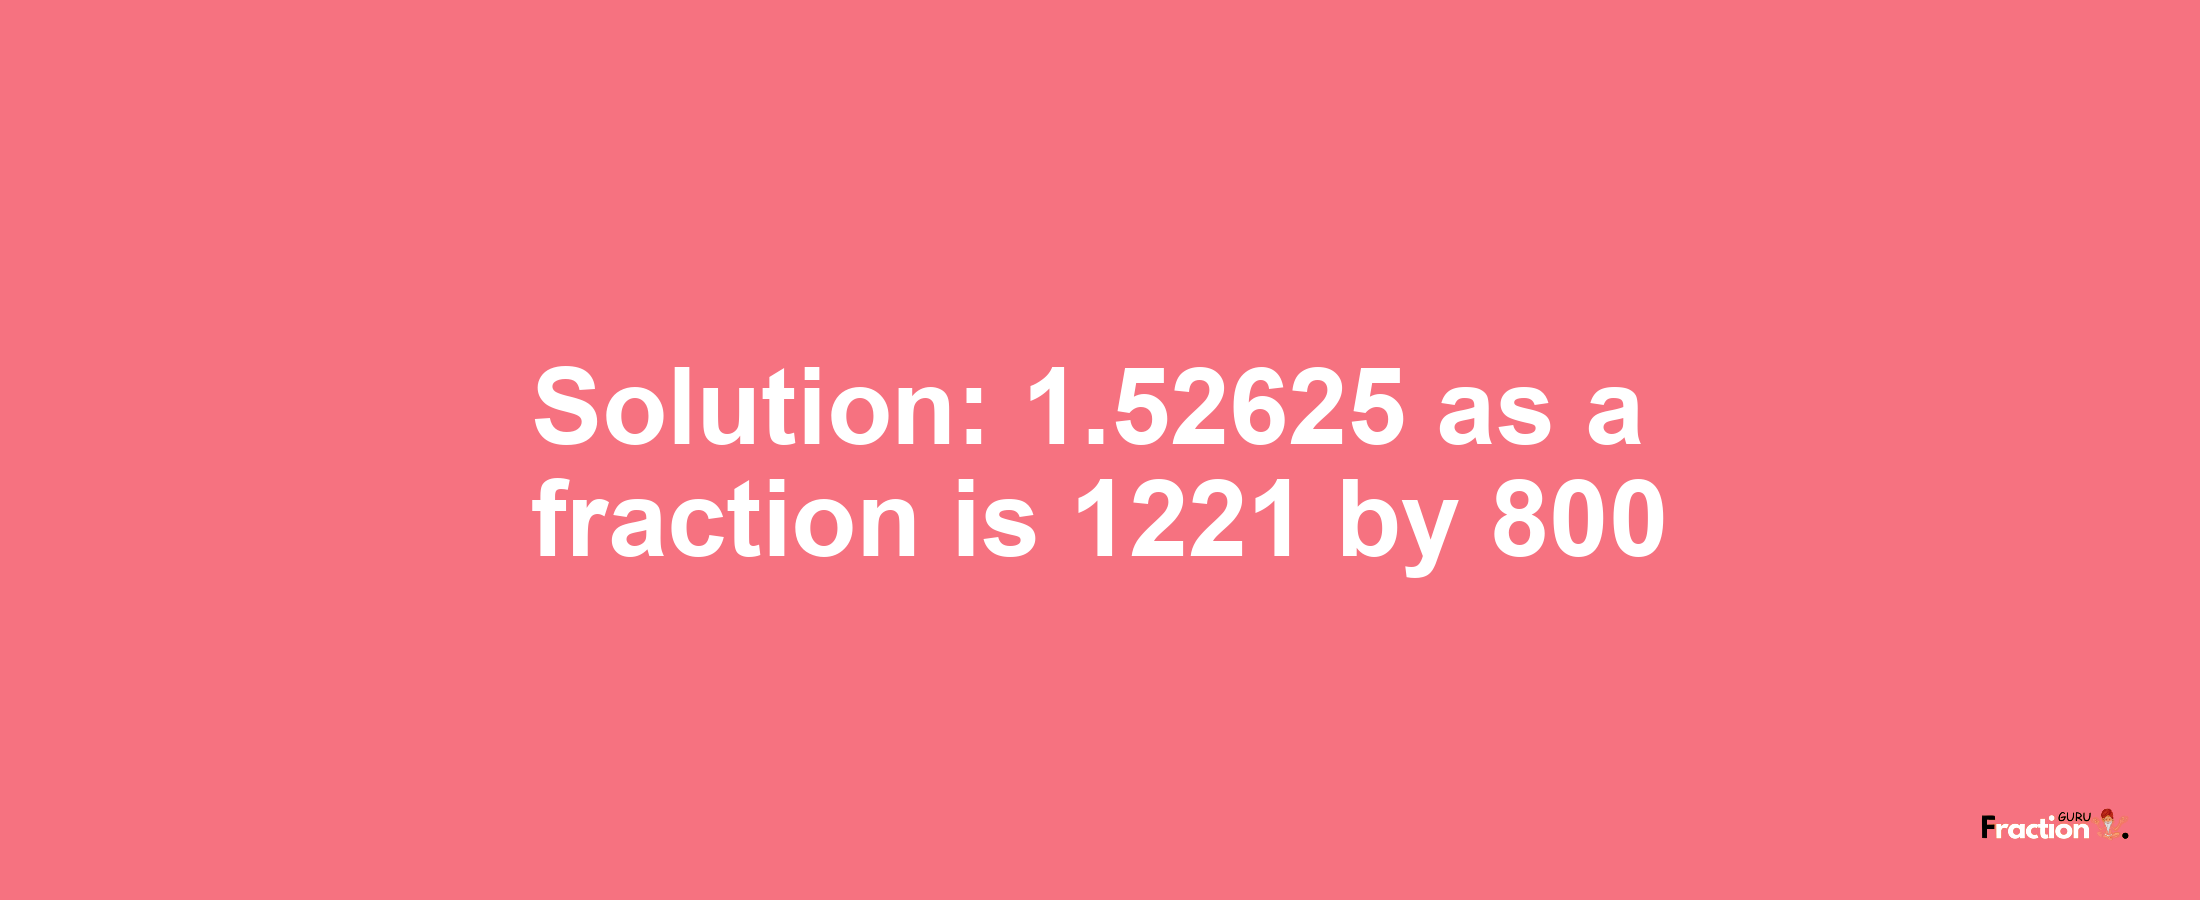 Solution:1.52625 as a fraction is 1221/800